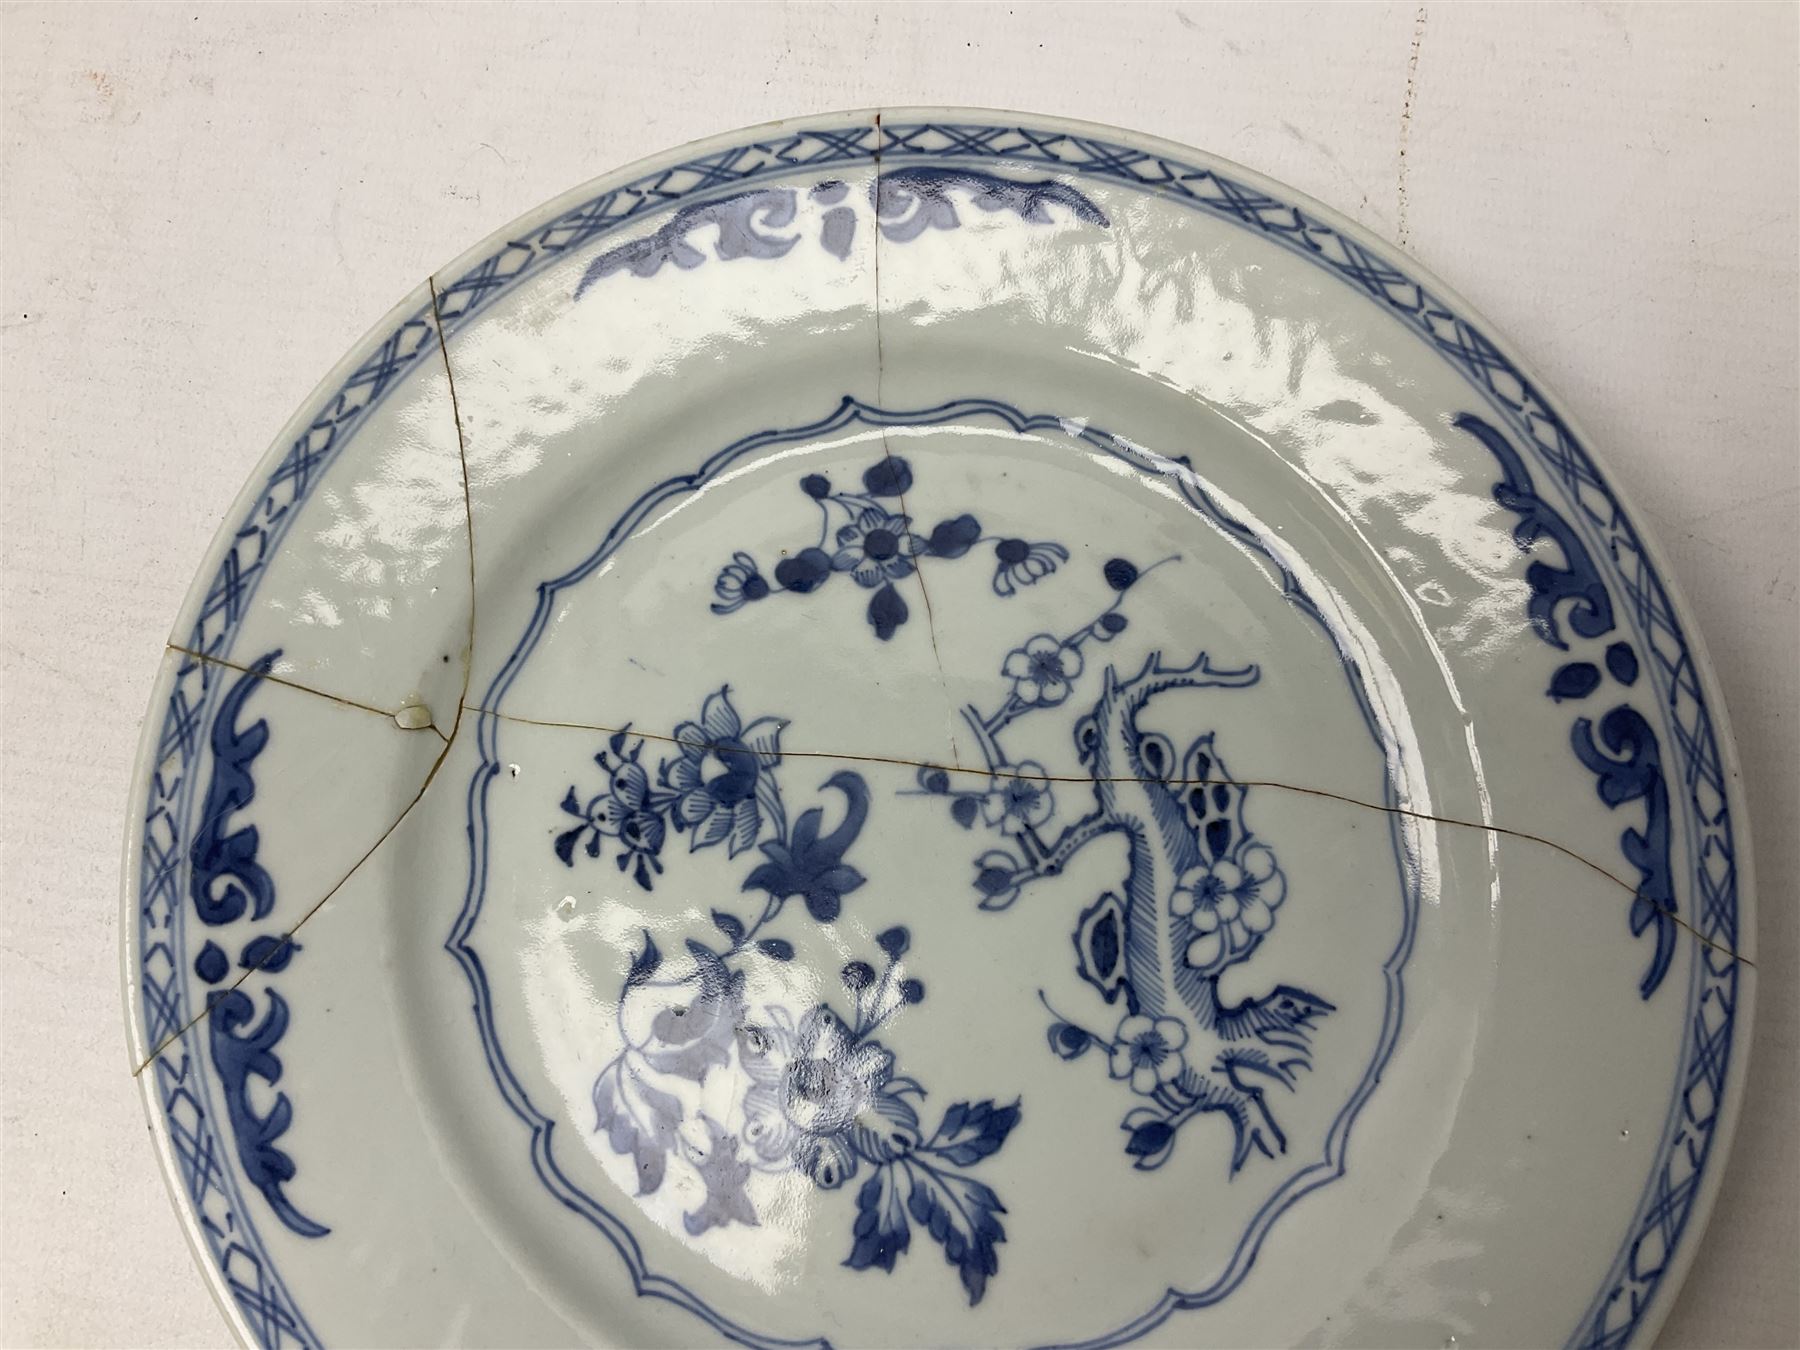 Set of four 18th century Chinese export blue and white porcelain plates with painted foliate decorat - Image 6 of 14